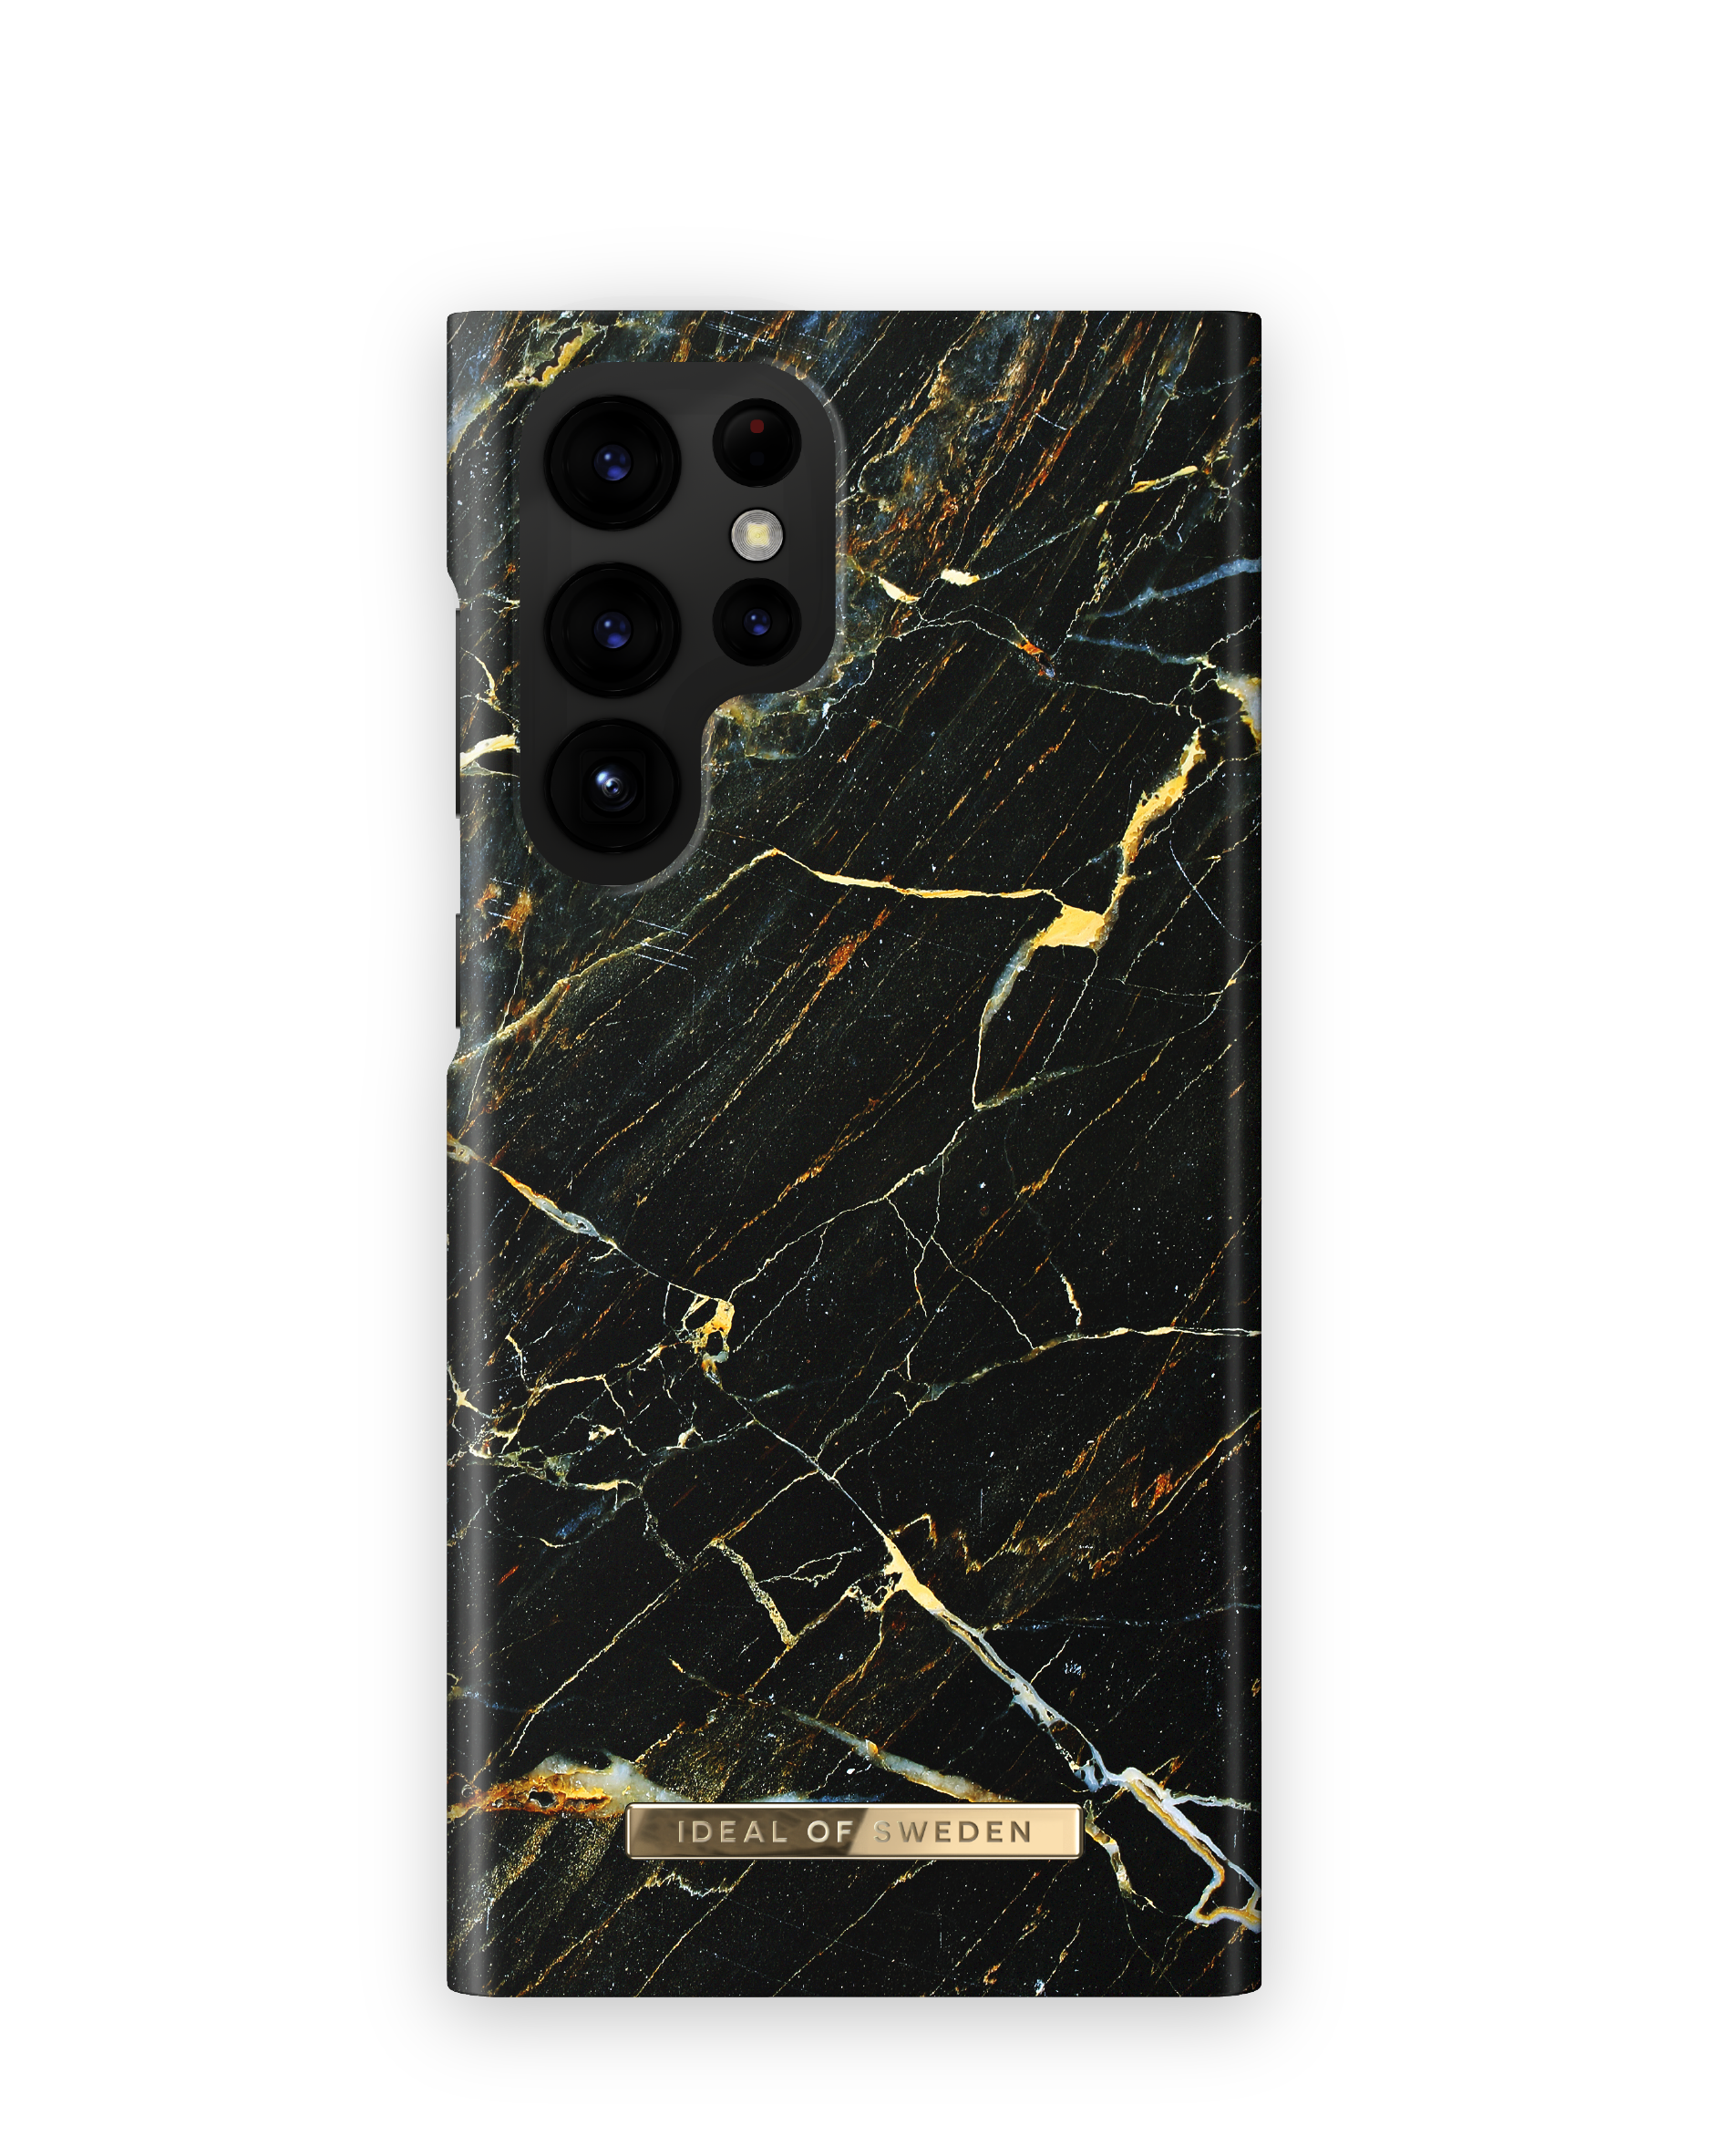 IDFCAW16-S22U-49, Ultra, SWEDEN OF Port IDEAL Backcover, Galaxy S22 Laurent Marble Samsung,